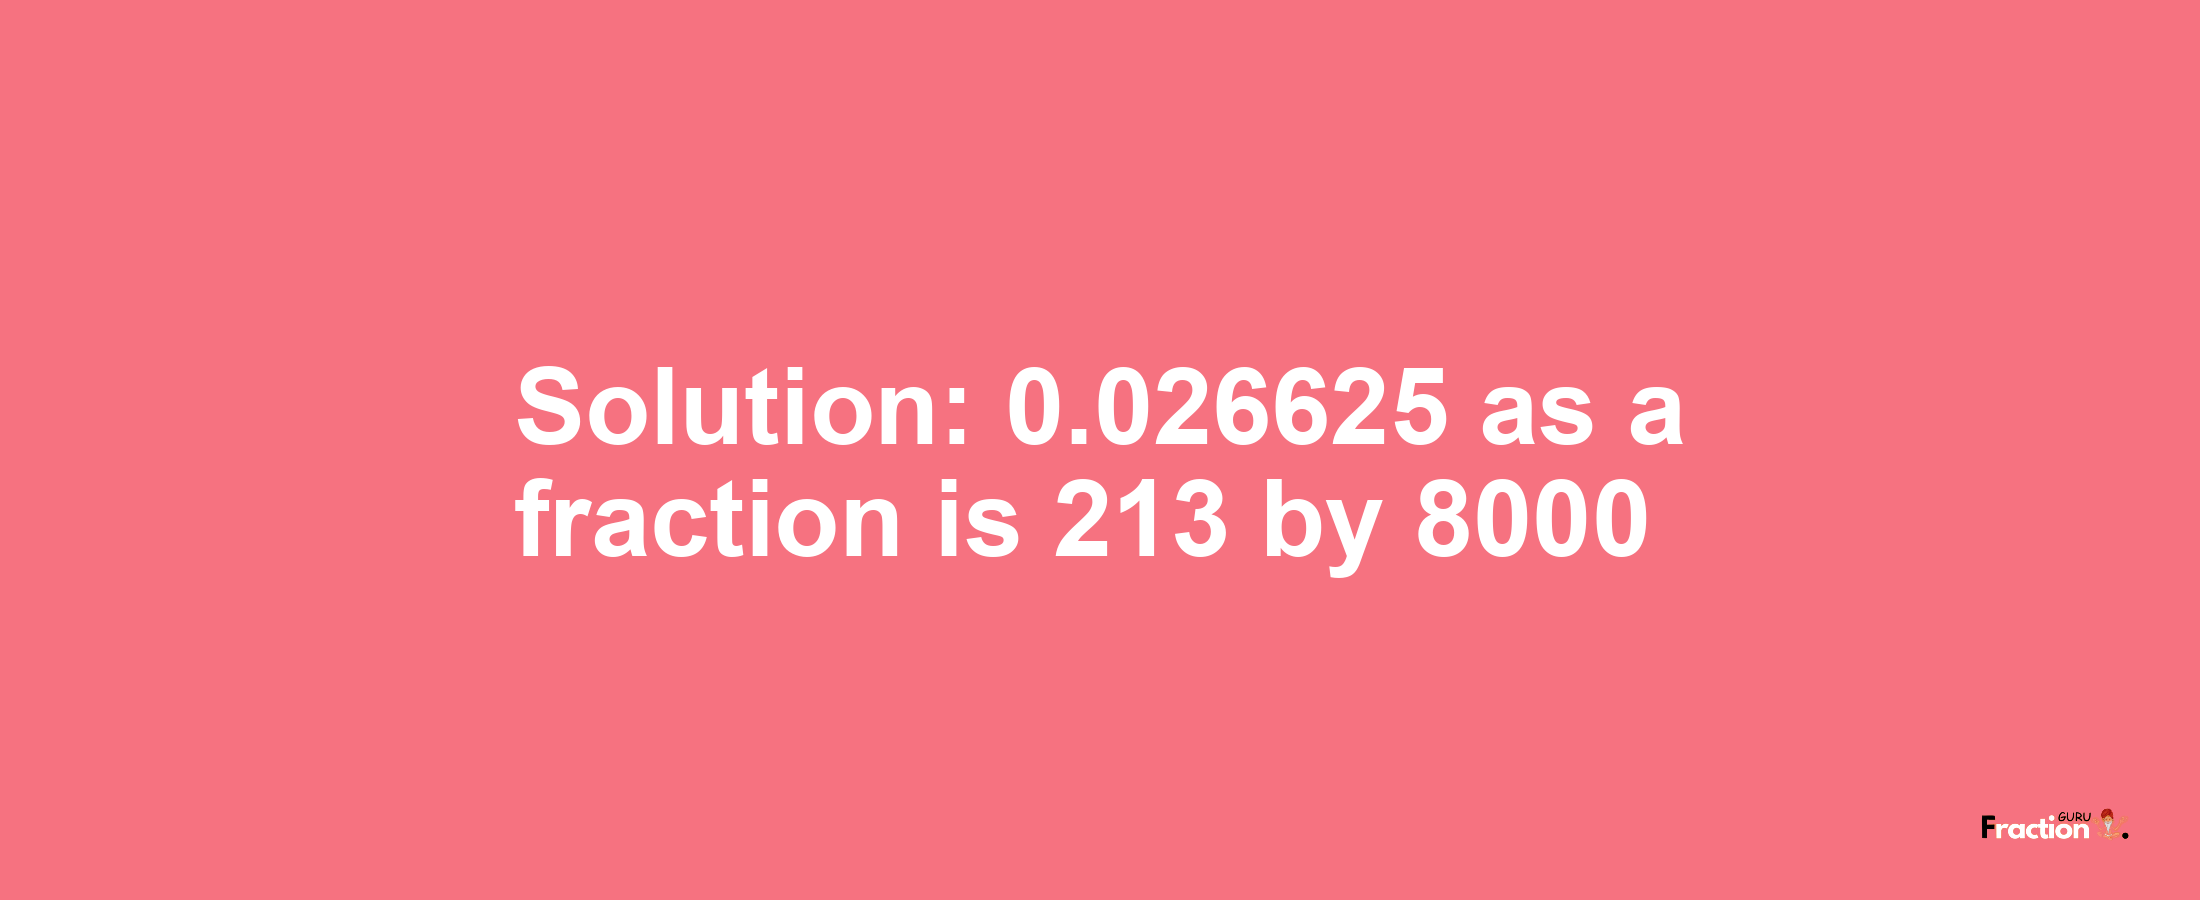 Solution:0.026625 as a fraction is 213/8000